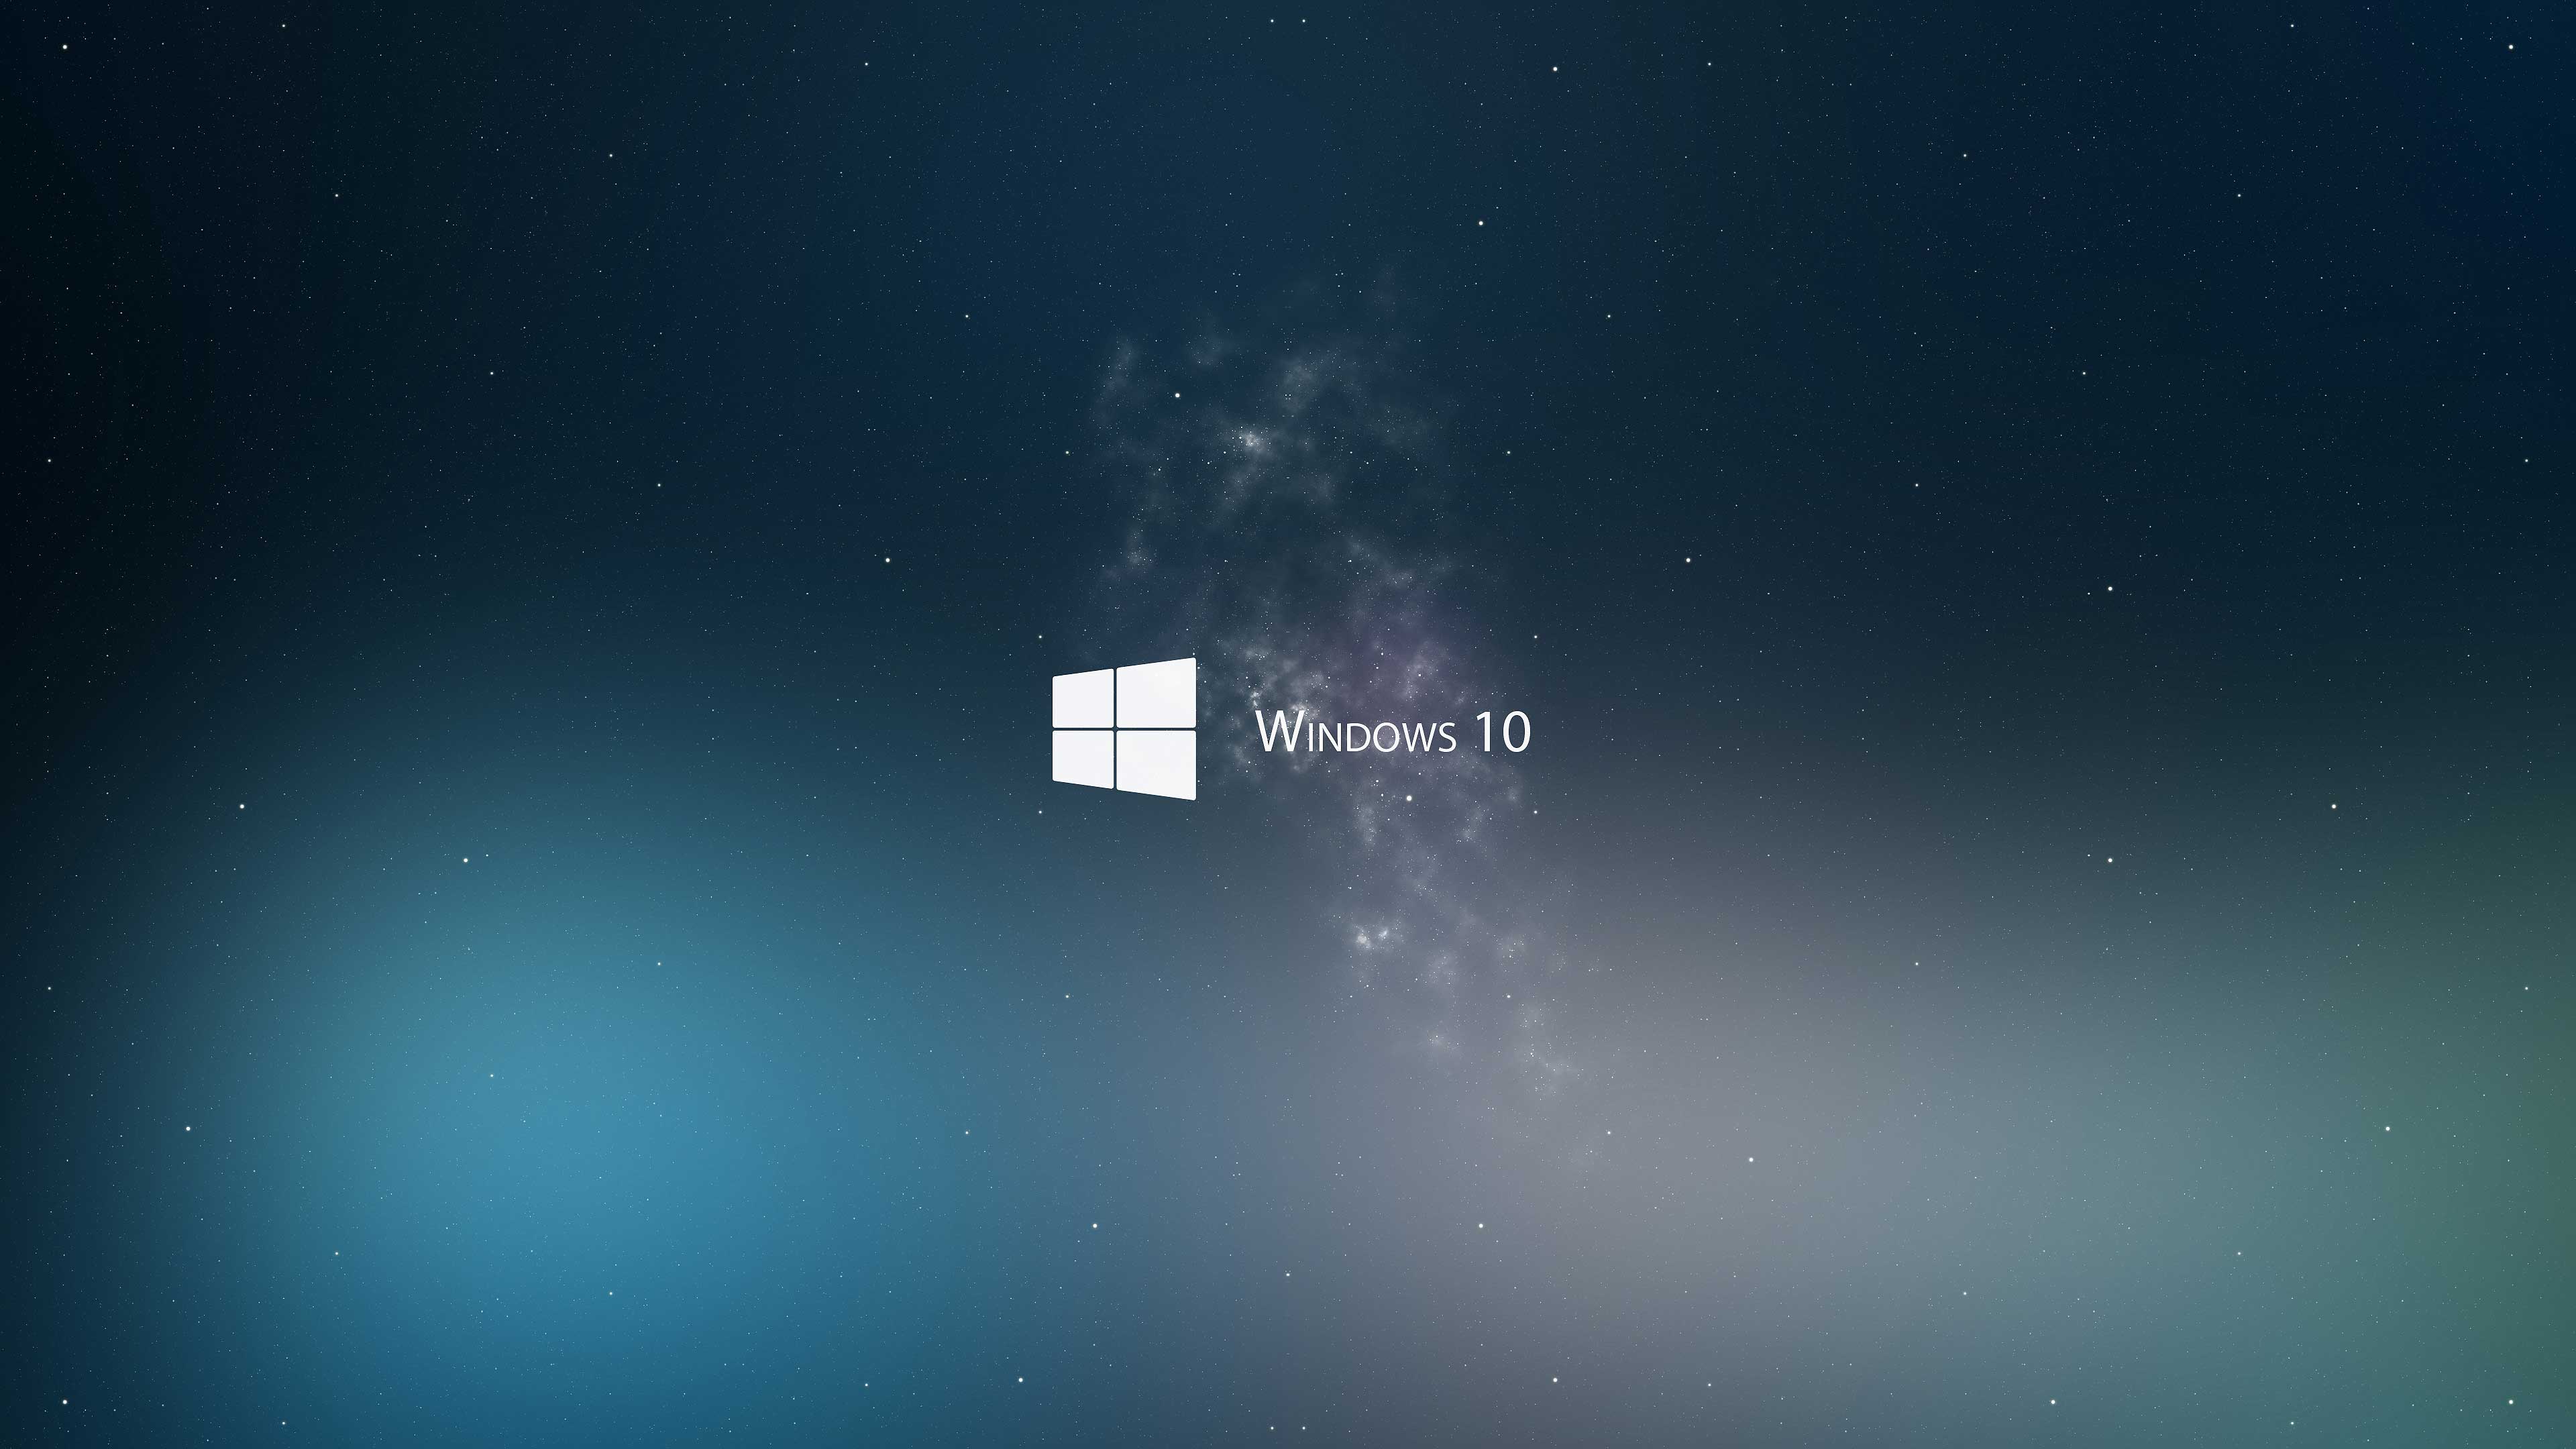 Windows 10 official HD wallpapers